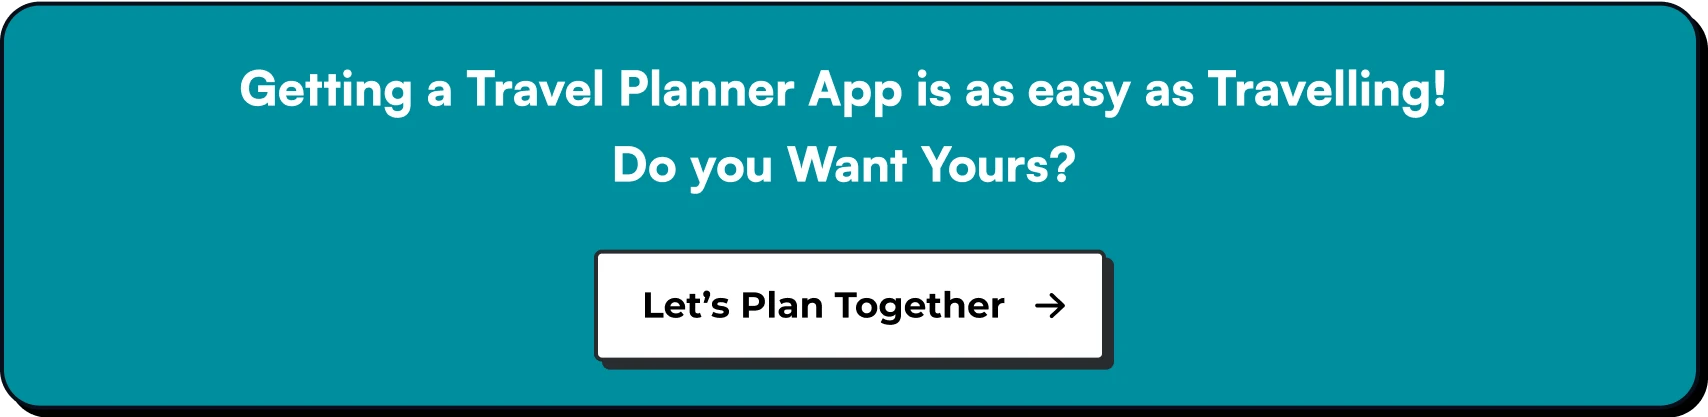 Getting a Travel Planner App is as easy as Travelling! Do you Want Yours?